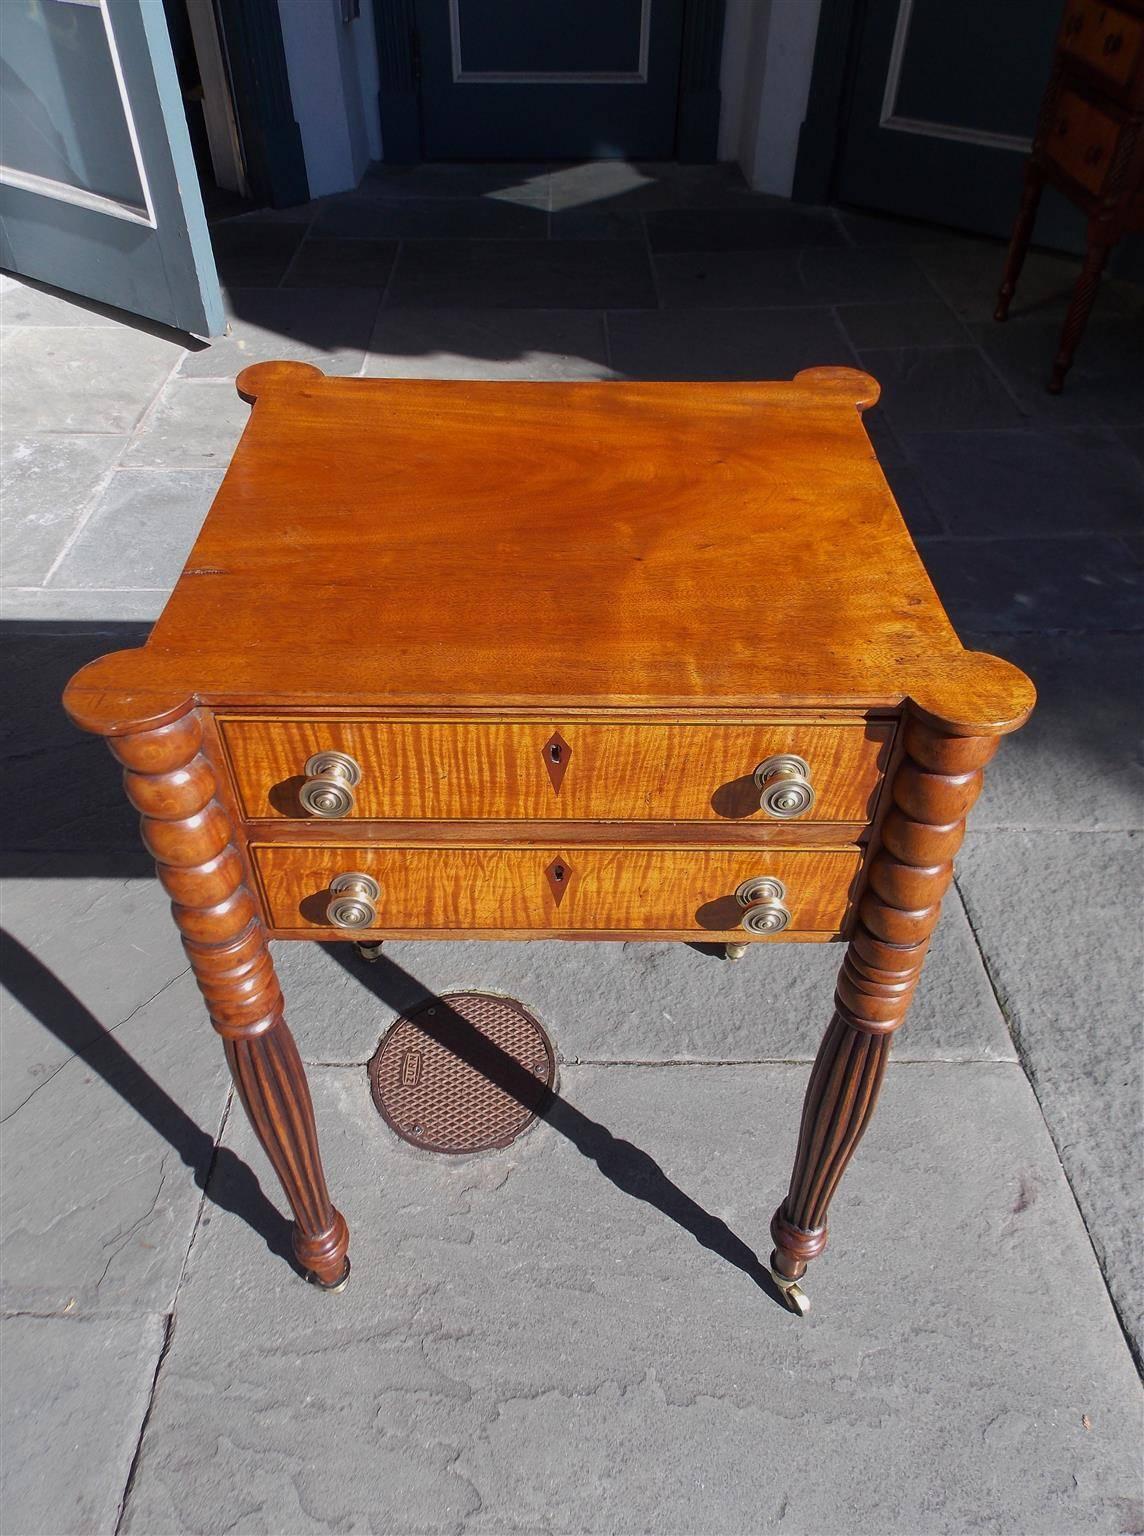 American mahogany & tiger maple two drawer stand with carved outset corners, original brass knobs, diamond inlaid escutcheons, and terminating on turned bulbous reeded legs with the original brass casters. Early 19th Century. Table is finished on